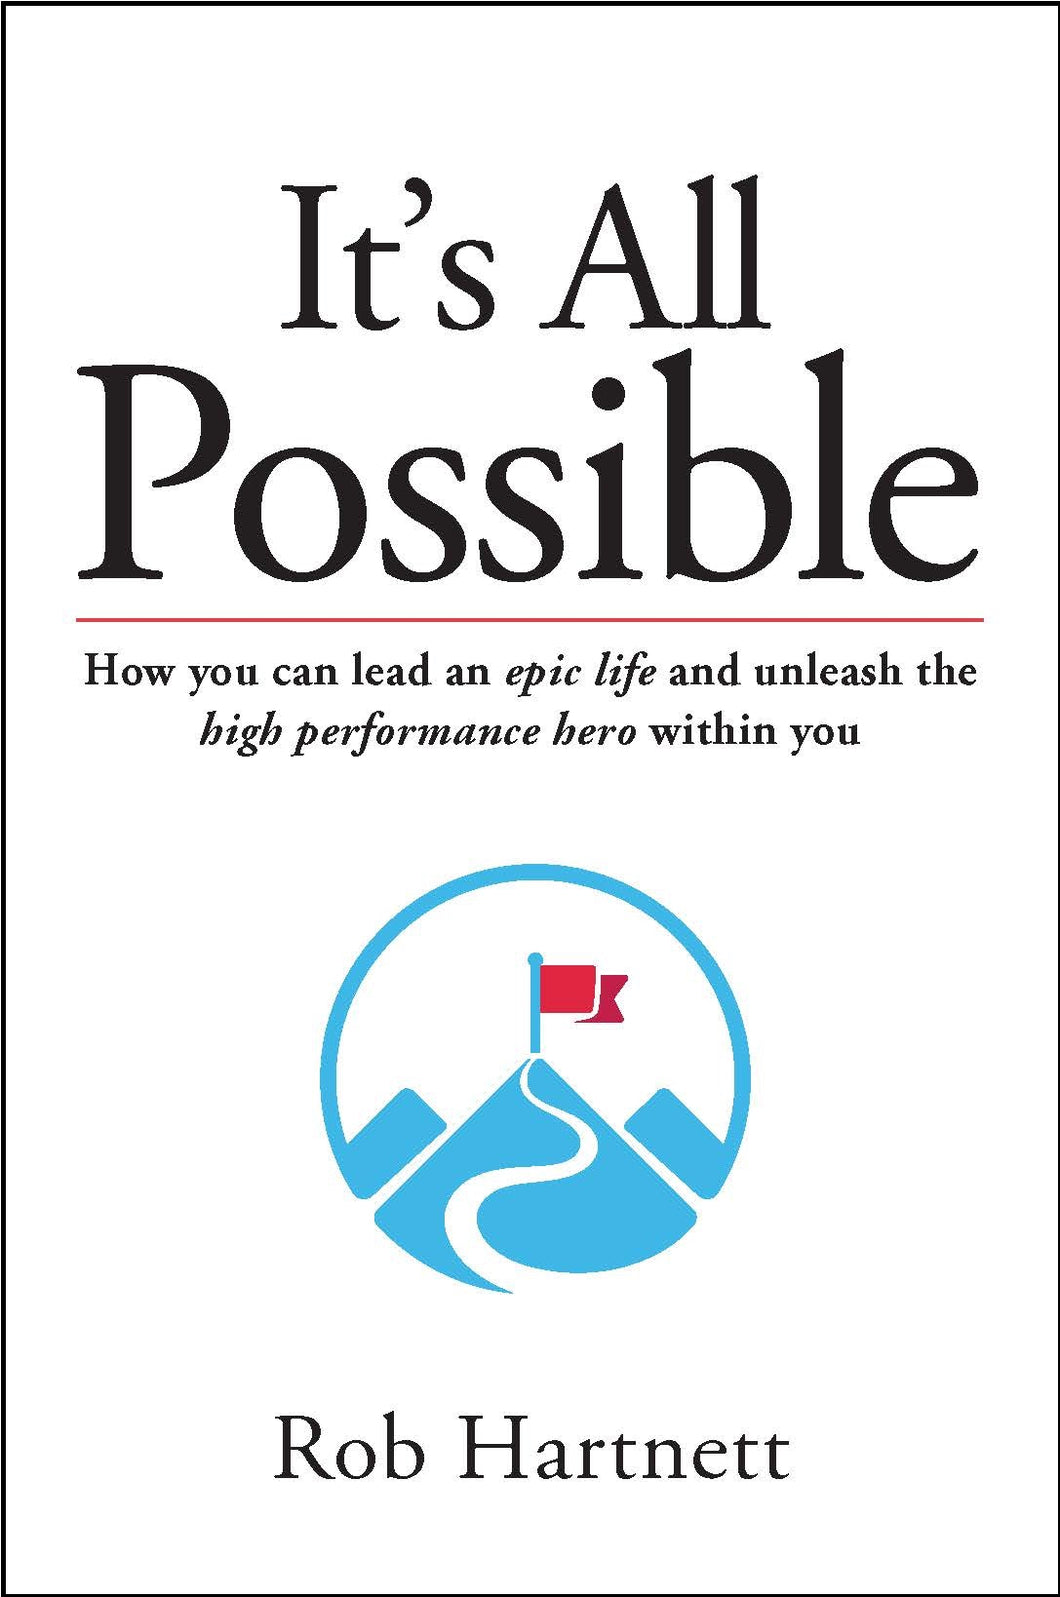 The business book cover of It's All Possible by Rob Hartnett